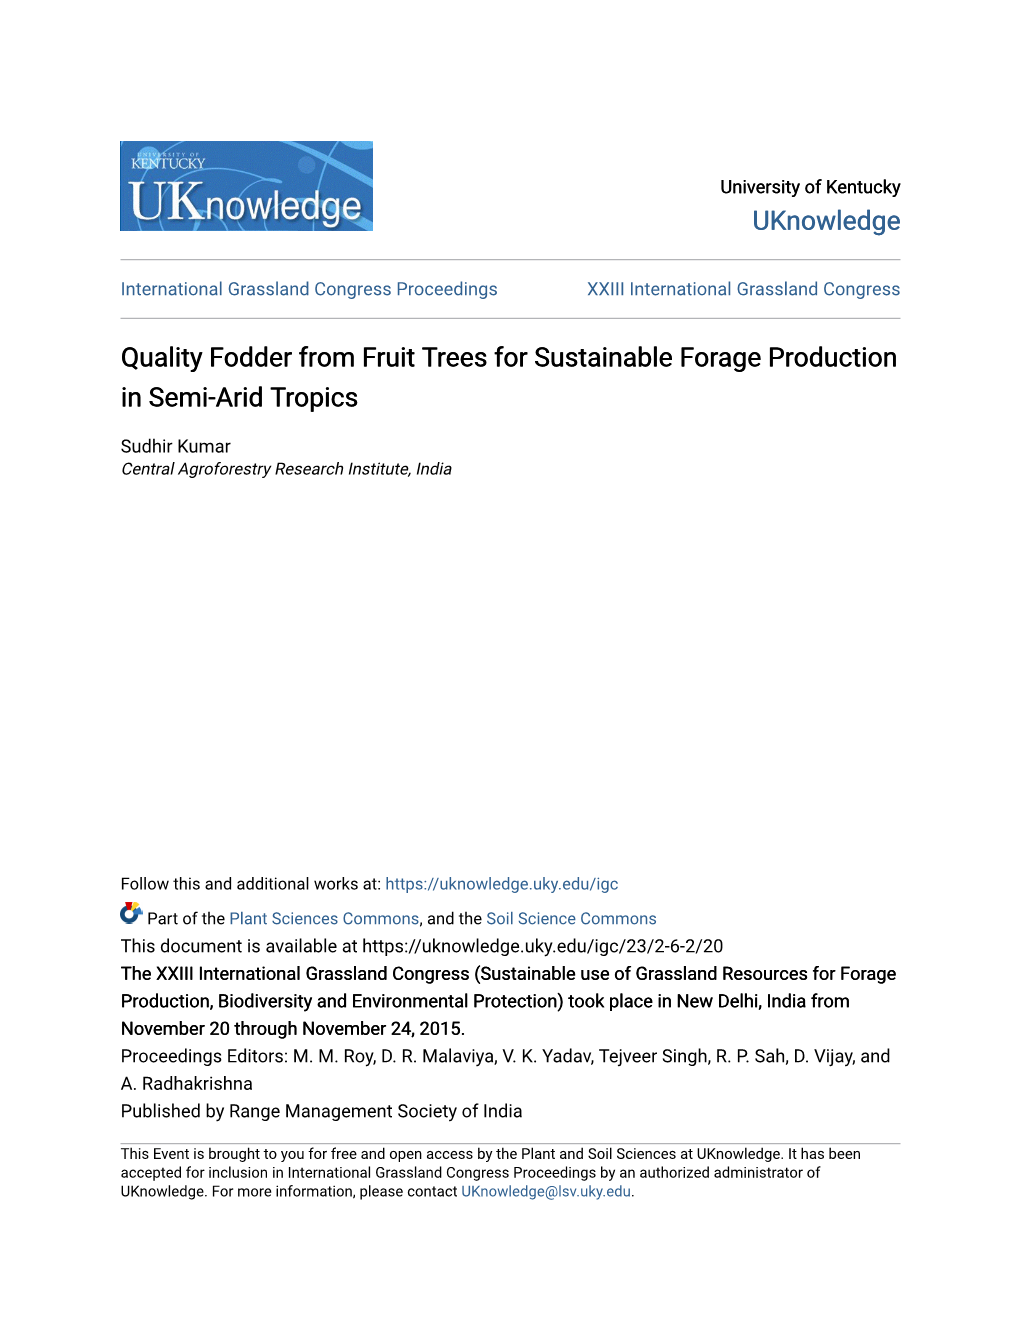 Quality Fodder from Fruit Trees for Sustainable Forage Production in Semi-Arid Tropics